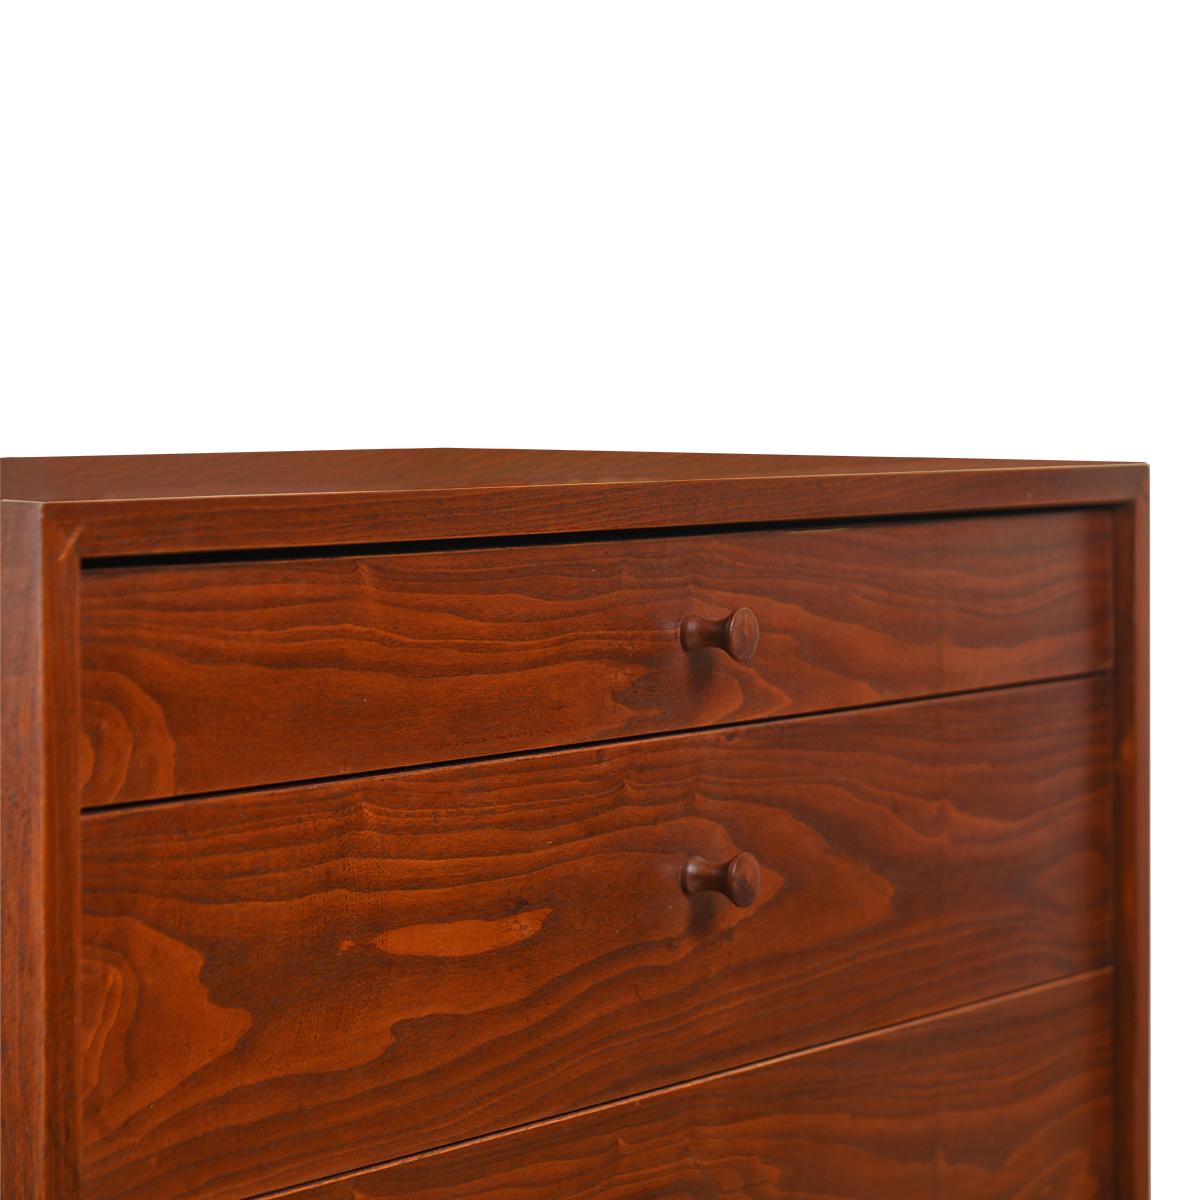 Low Midcentury Walnut 3-Drawer Chest Dresser In Good Condition For Sale In Kensington, MD